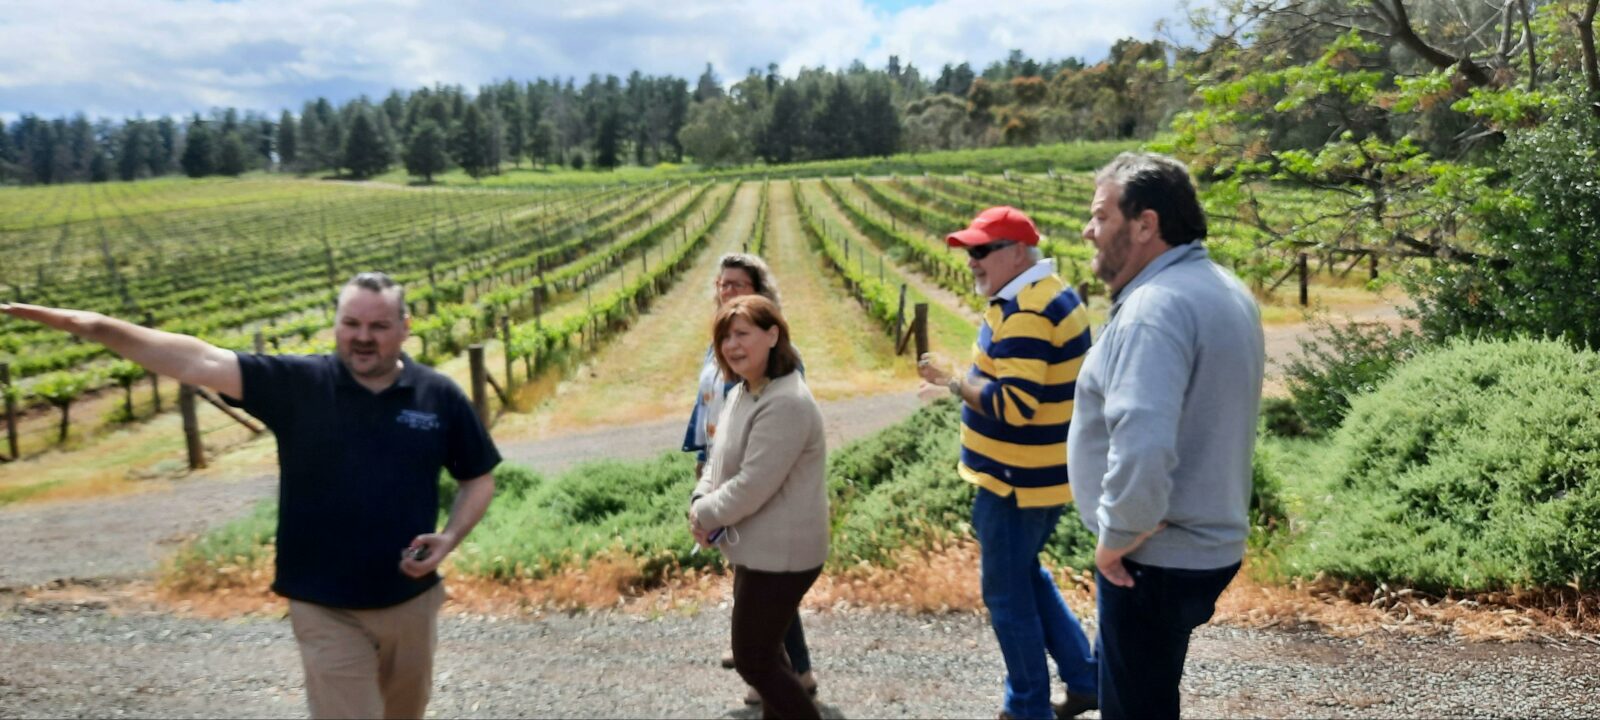 A group of 4 people in vineyards with a fifth person guiding them by pointing out.